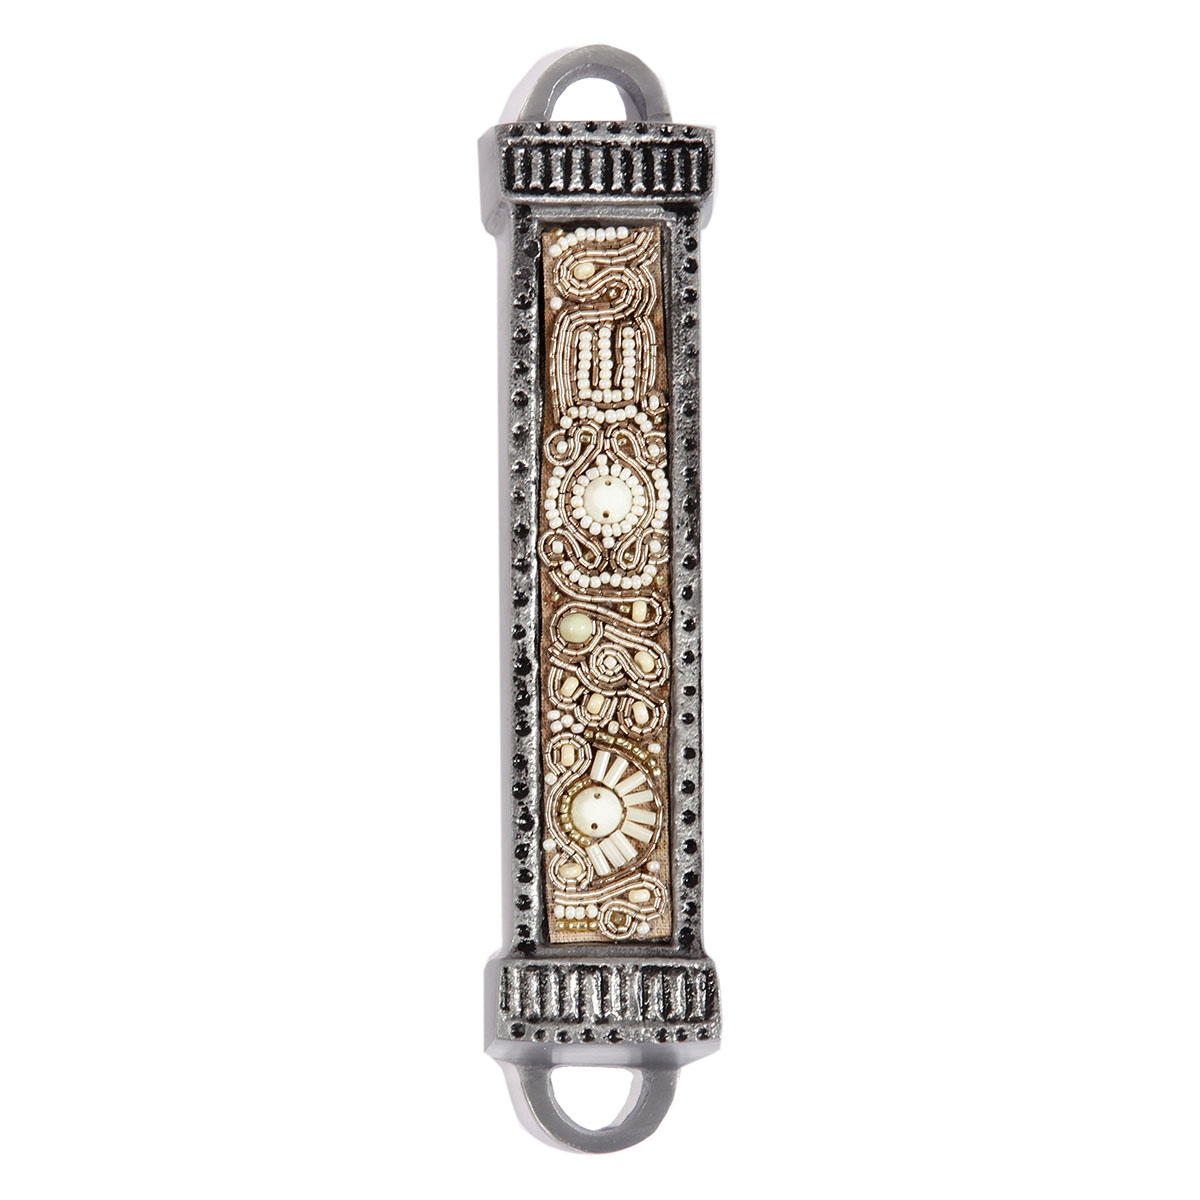 Yair Emanuel Aluminum Mezuzah with Embroidered Beads-Brown/Beige - 1